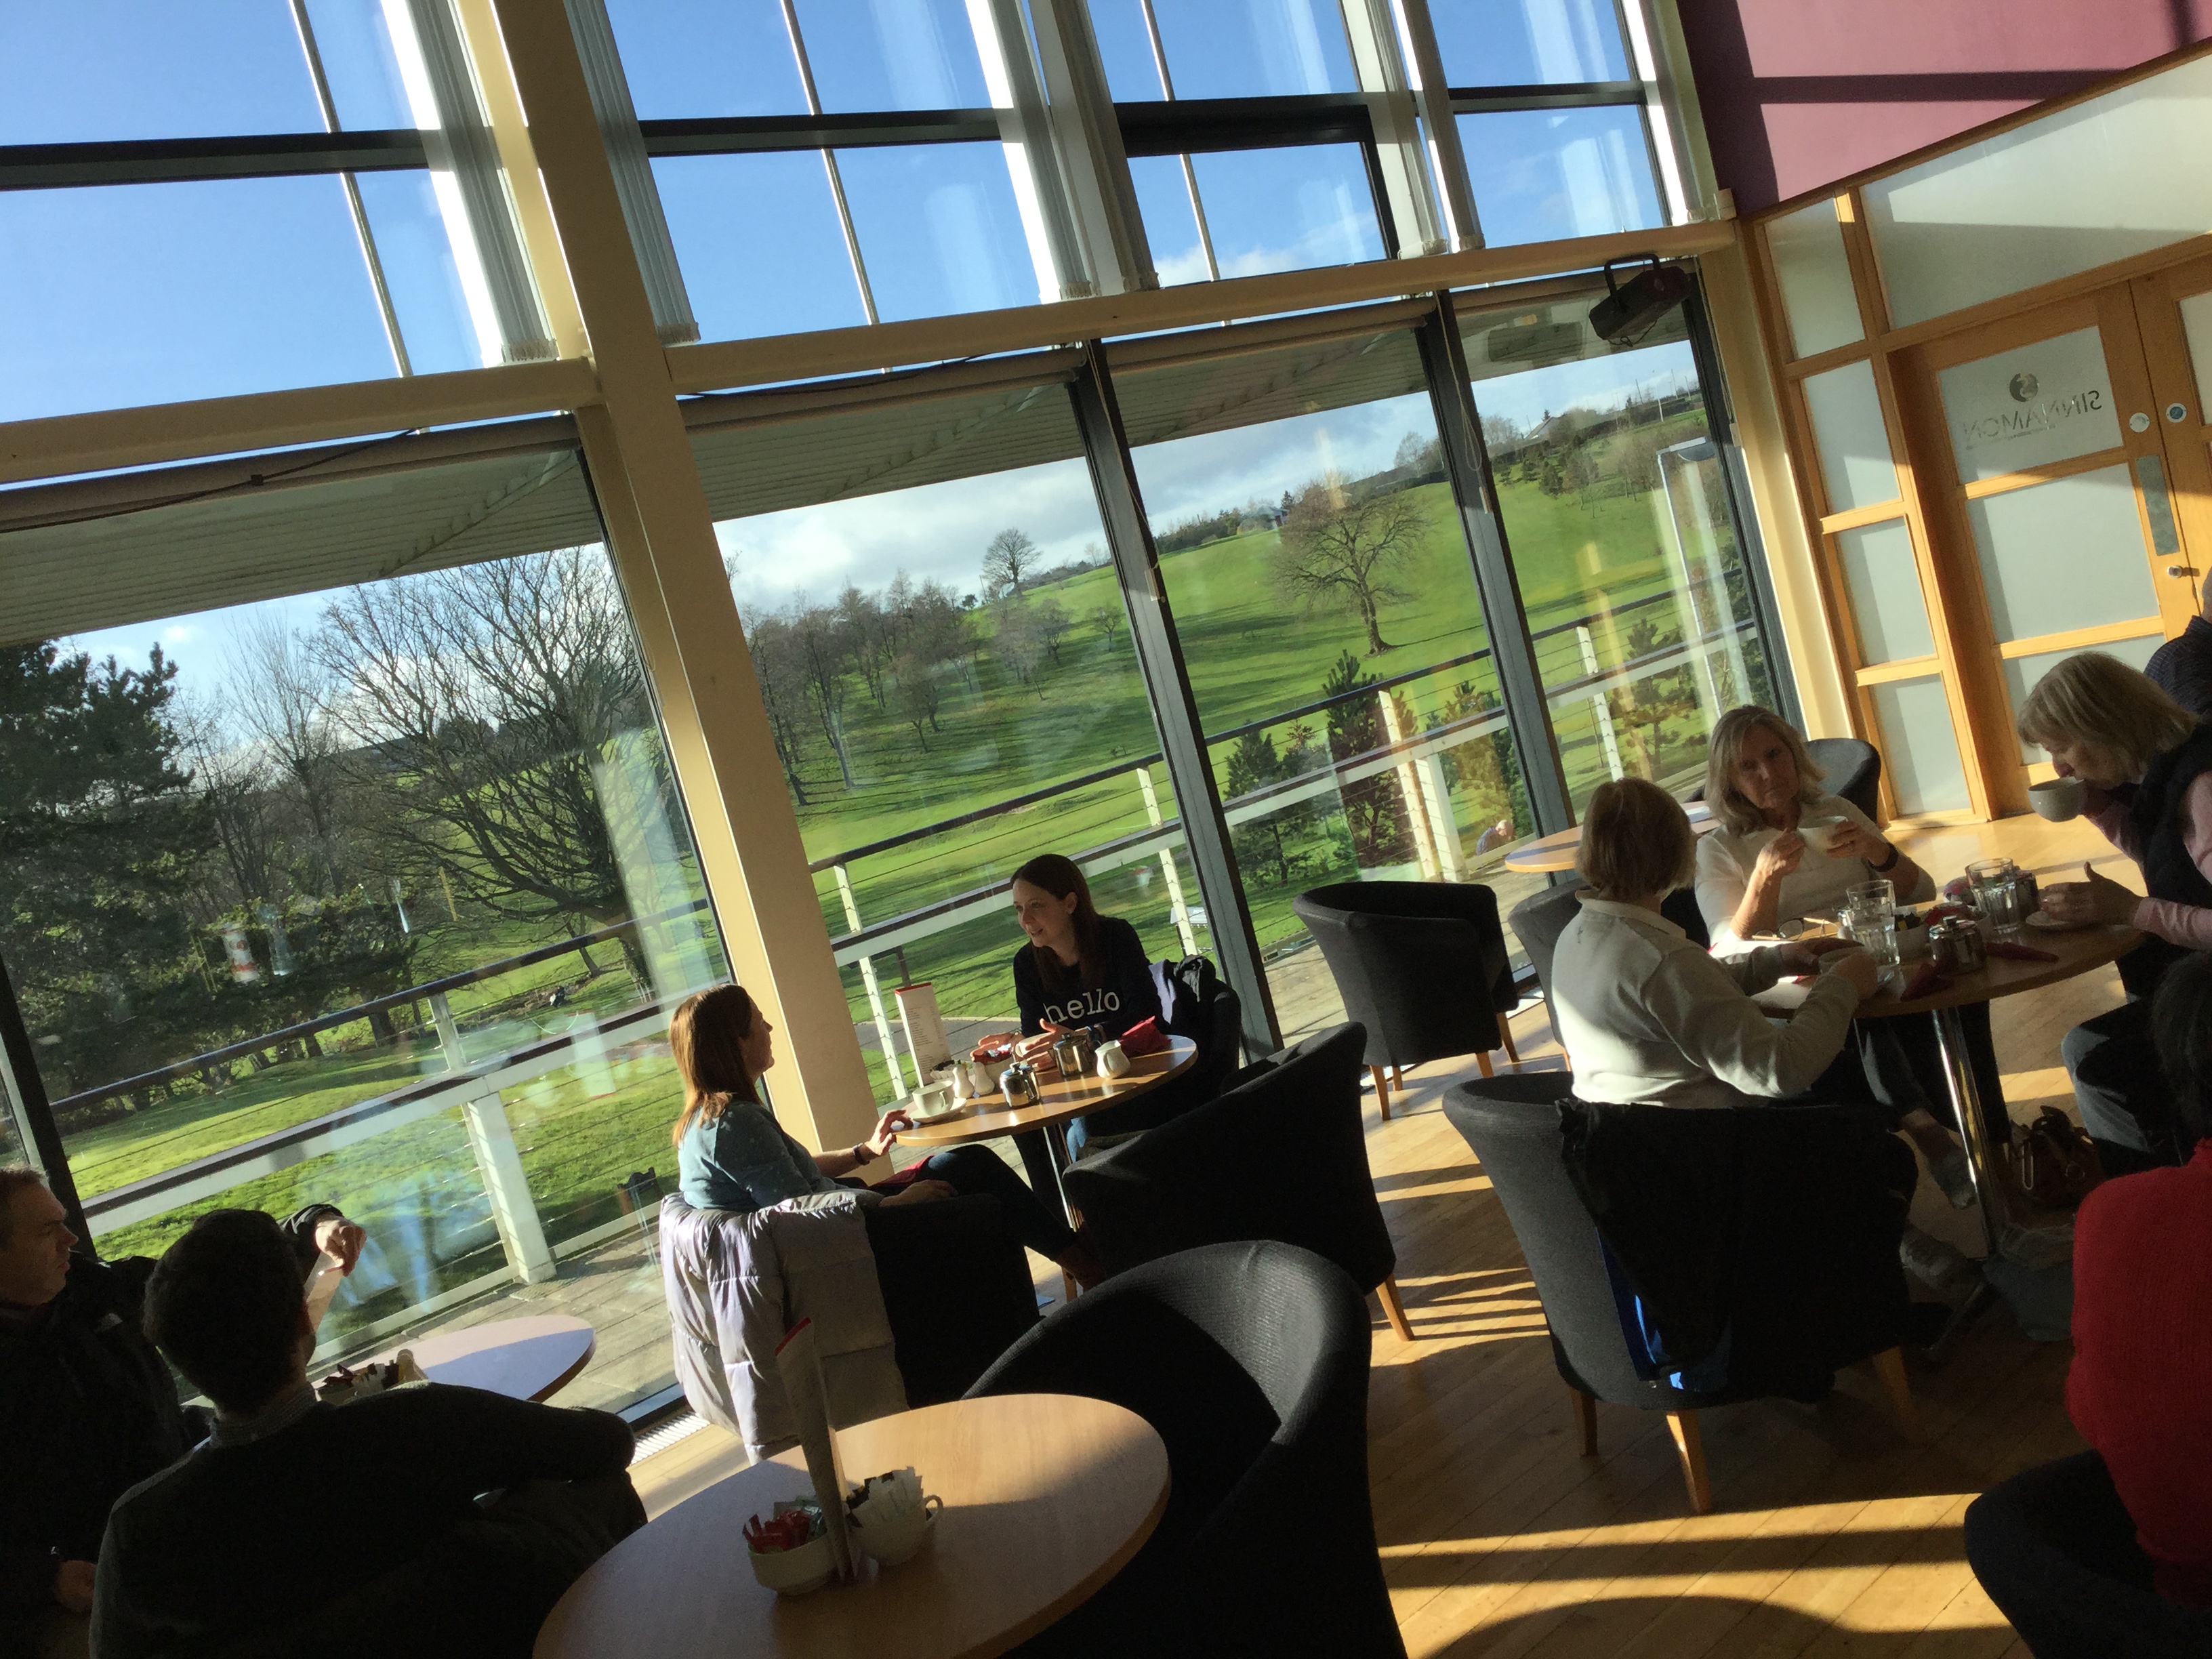 Groups of people sitting at tables eating with large window looking out at golf course